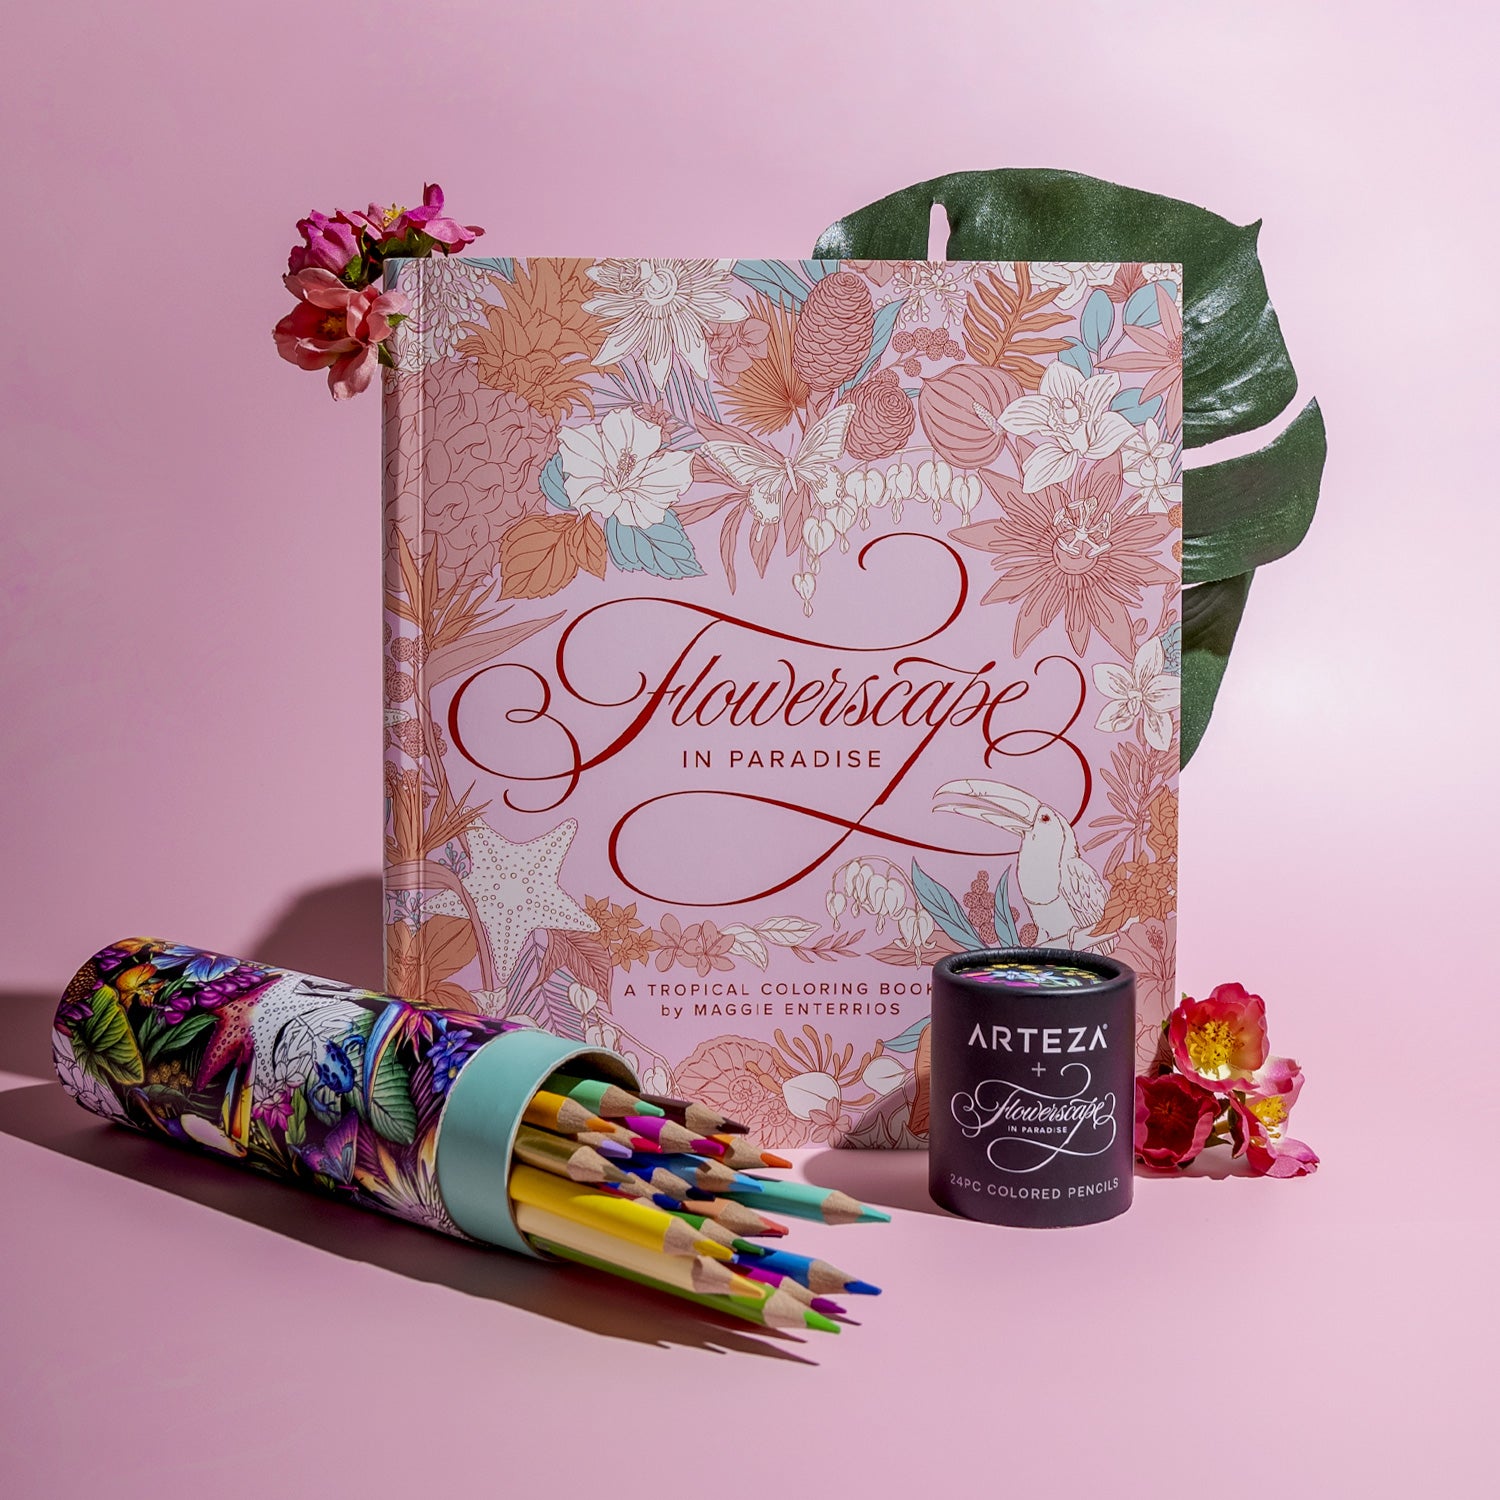 Flowerscape in Paradise Coloring Book & Colored Pencil Set